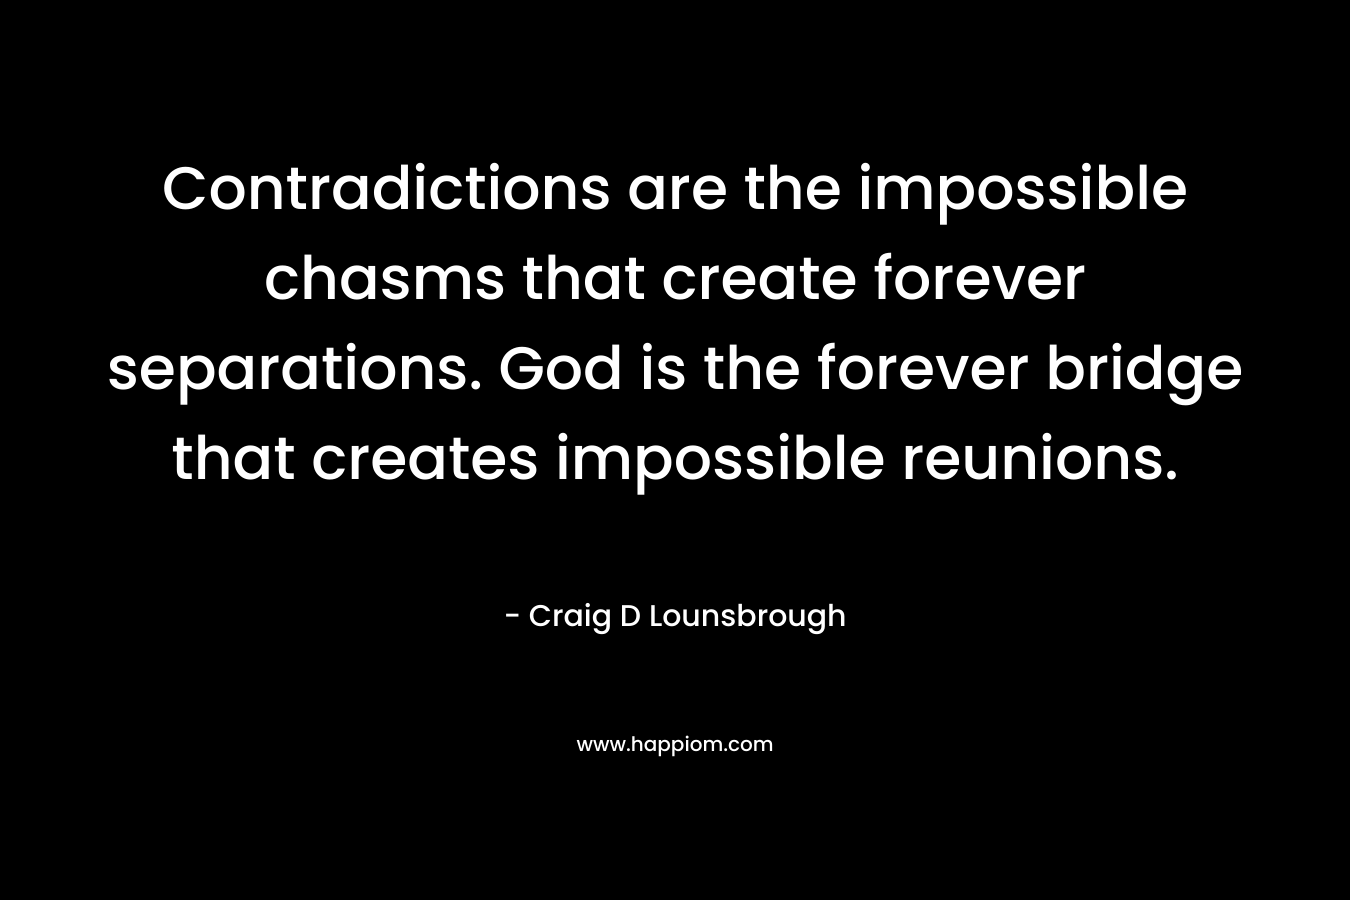 Contradictions are the impossible chasms that create forever separations. God is the forever bridge that creates impossible reunions. – Craig D Lounsbrough